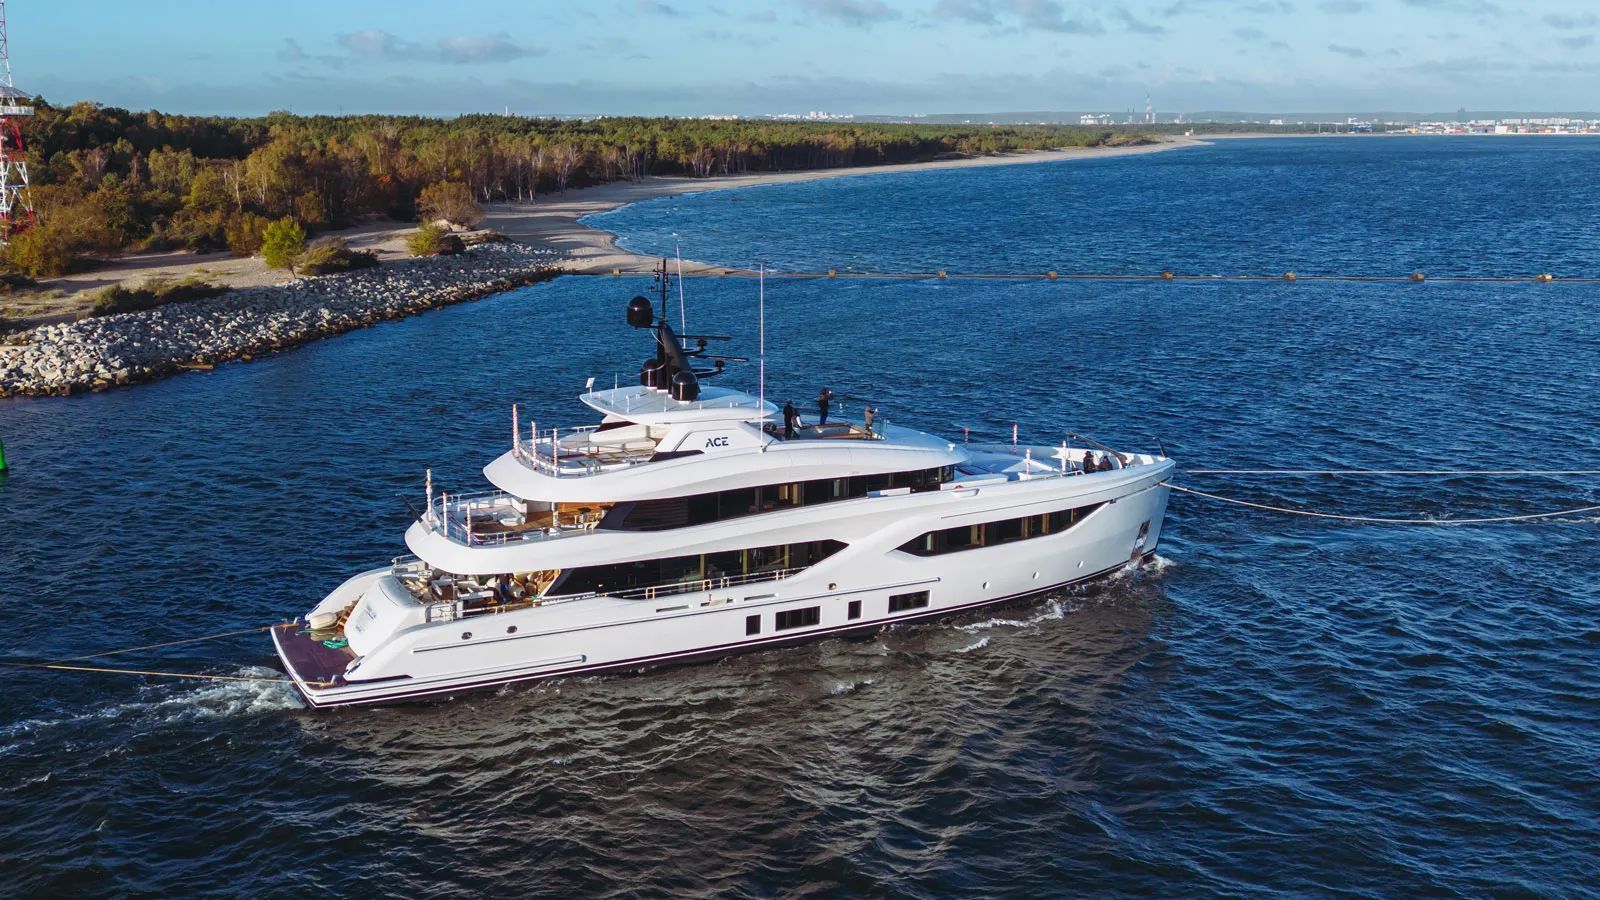 44m Ace Launched by Conrad Shipyard [In the News]